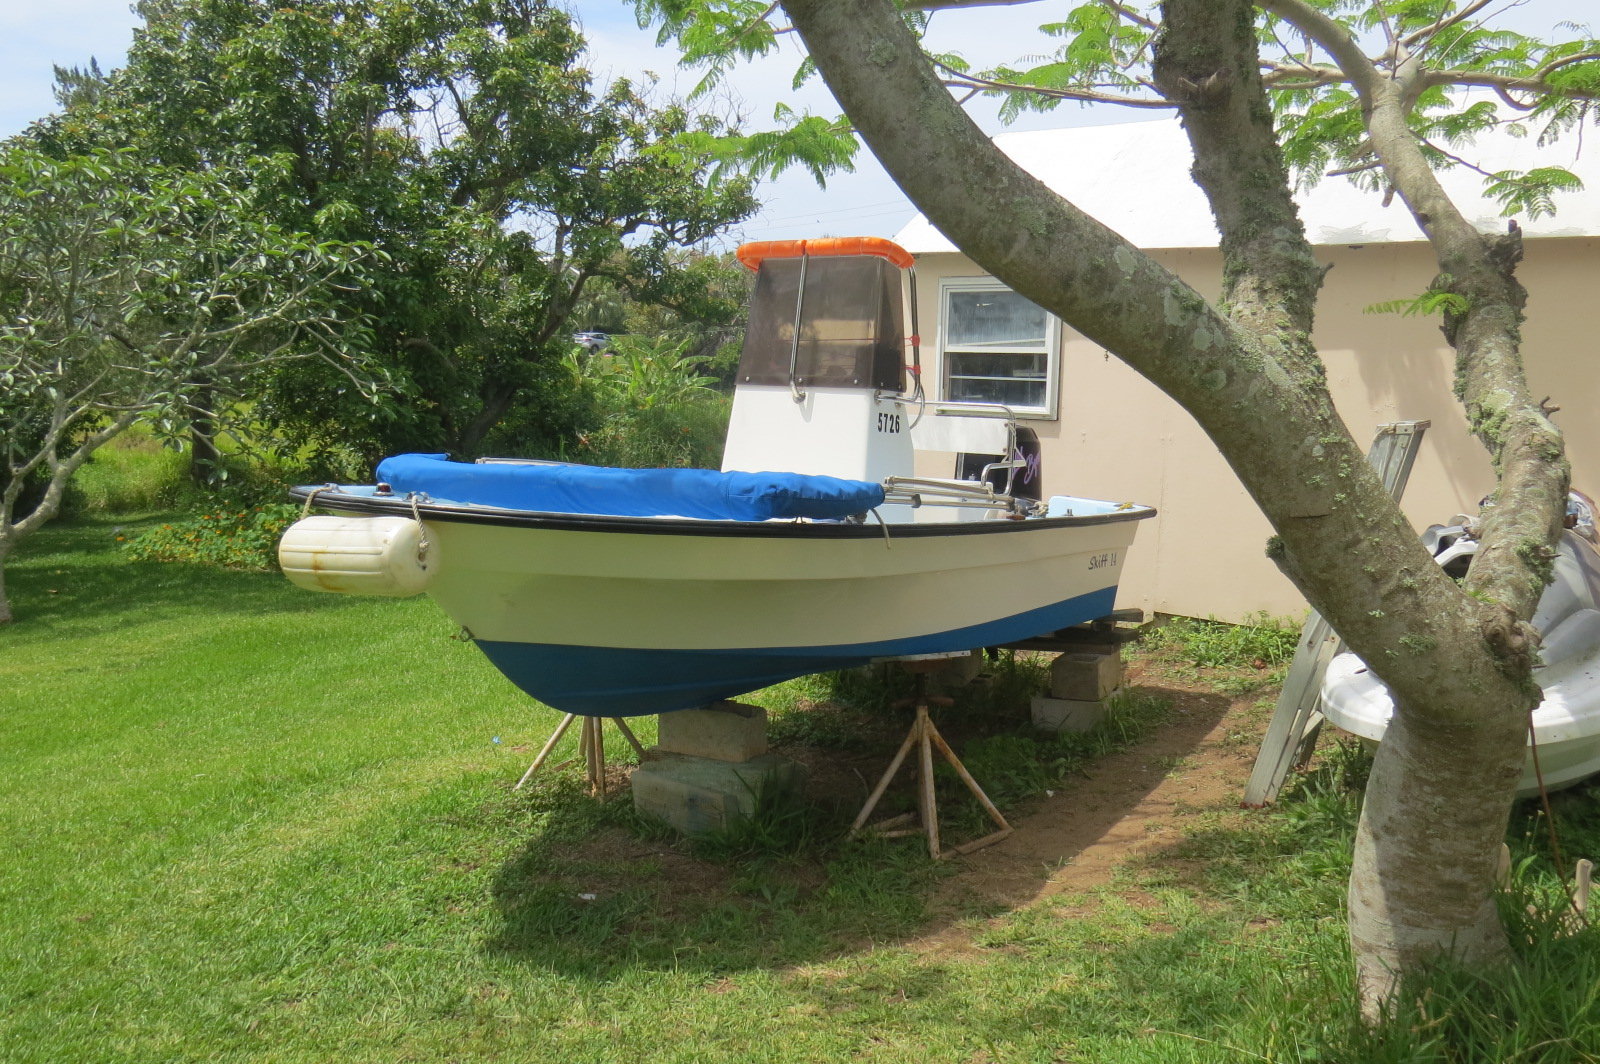 What do I need to consider and think about when adding a bimini